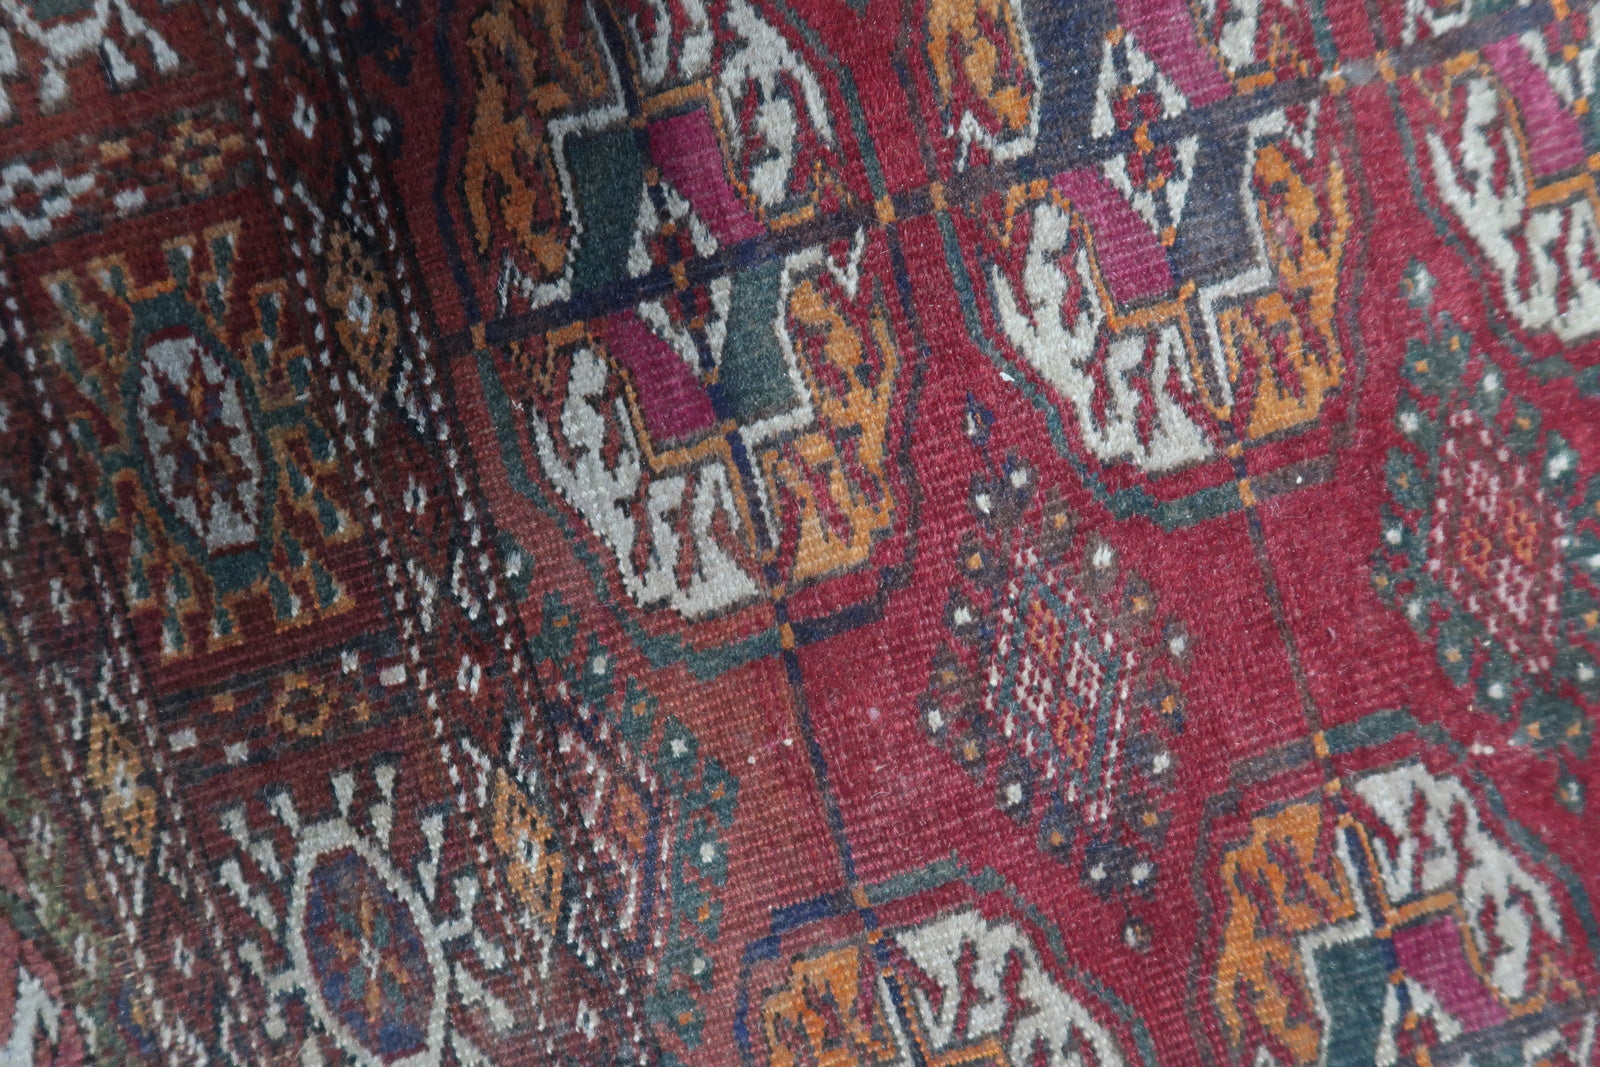 Detailed view of the overall design and size of the Handmade Vintage Uzbek Bukhara Rug